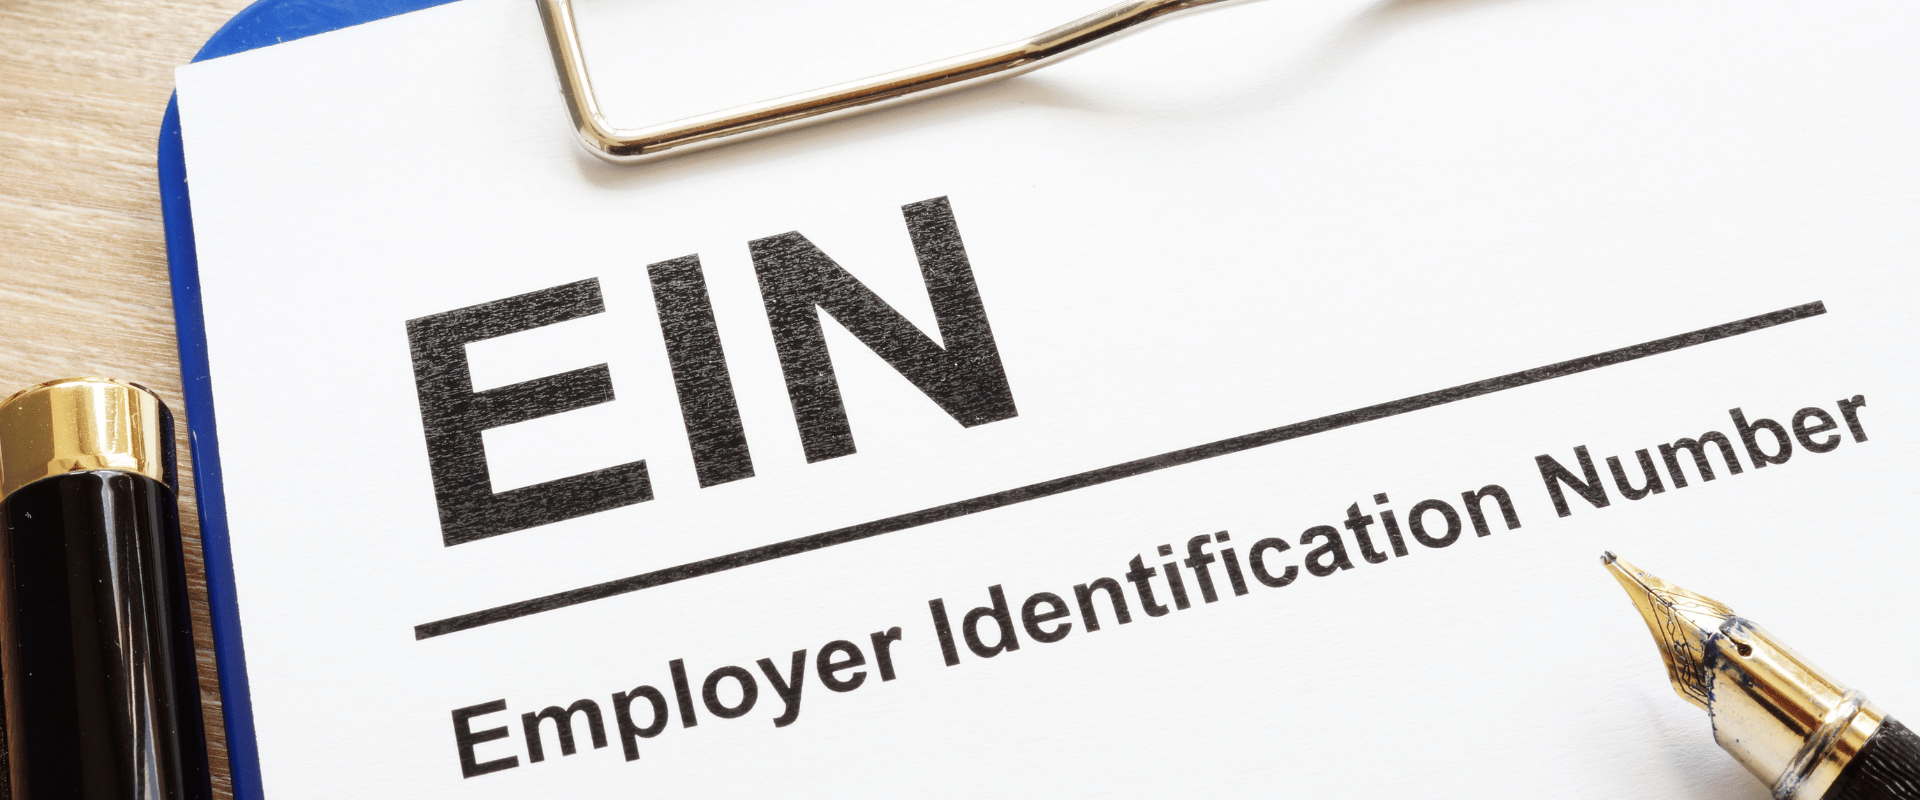 what is employer identification number and how much it costs